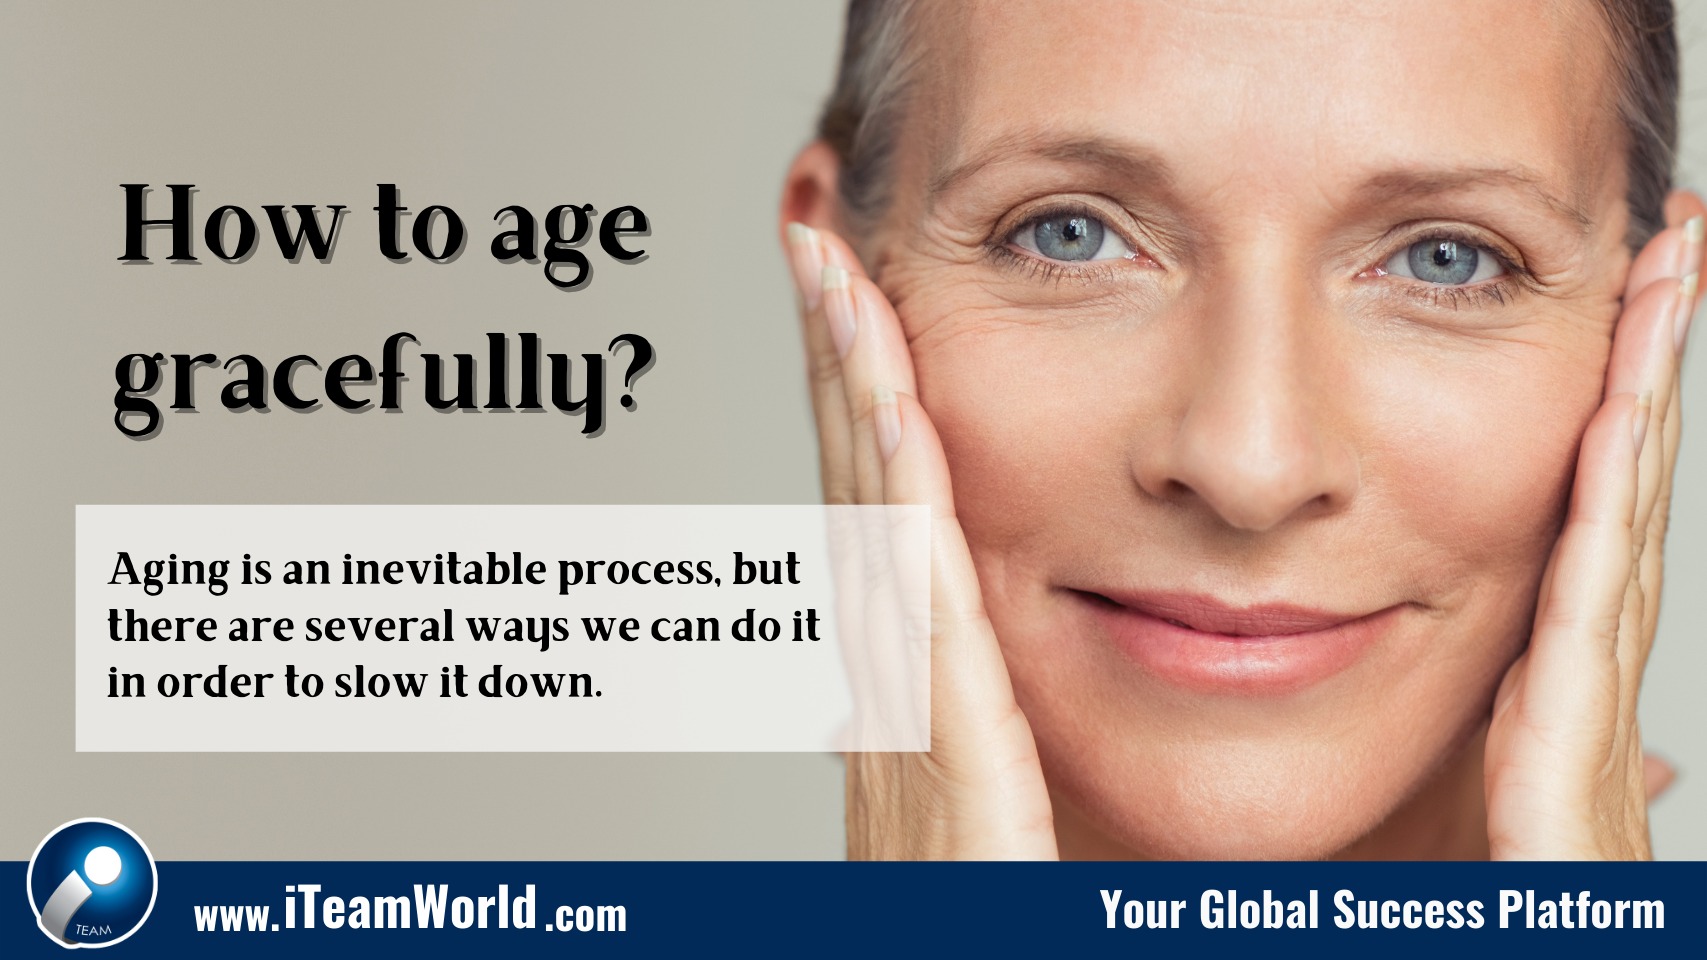 How to age gracefully